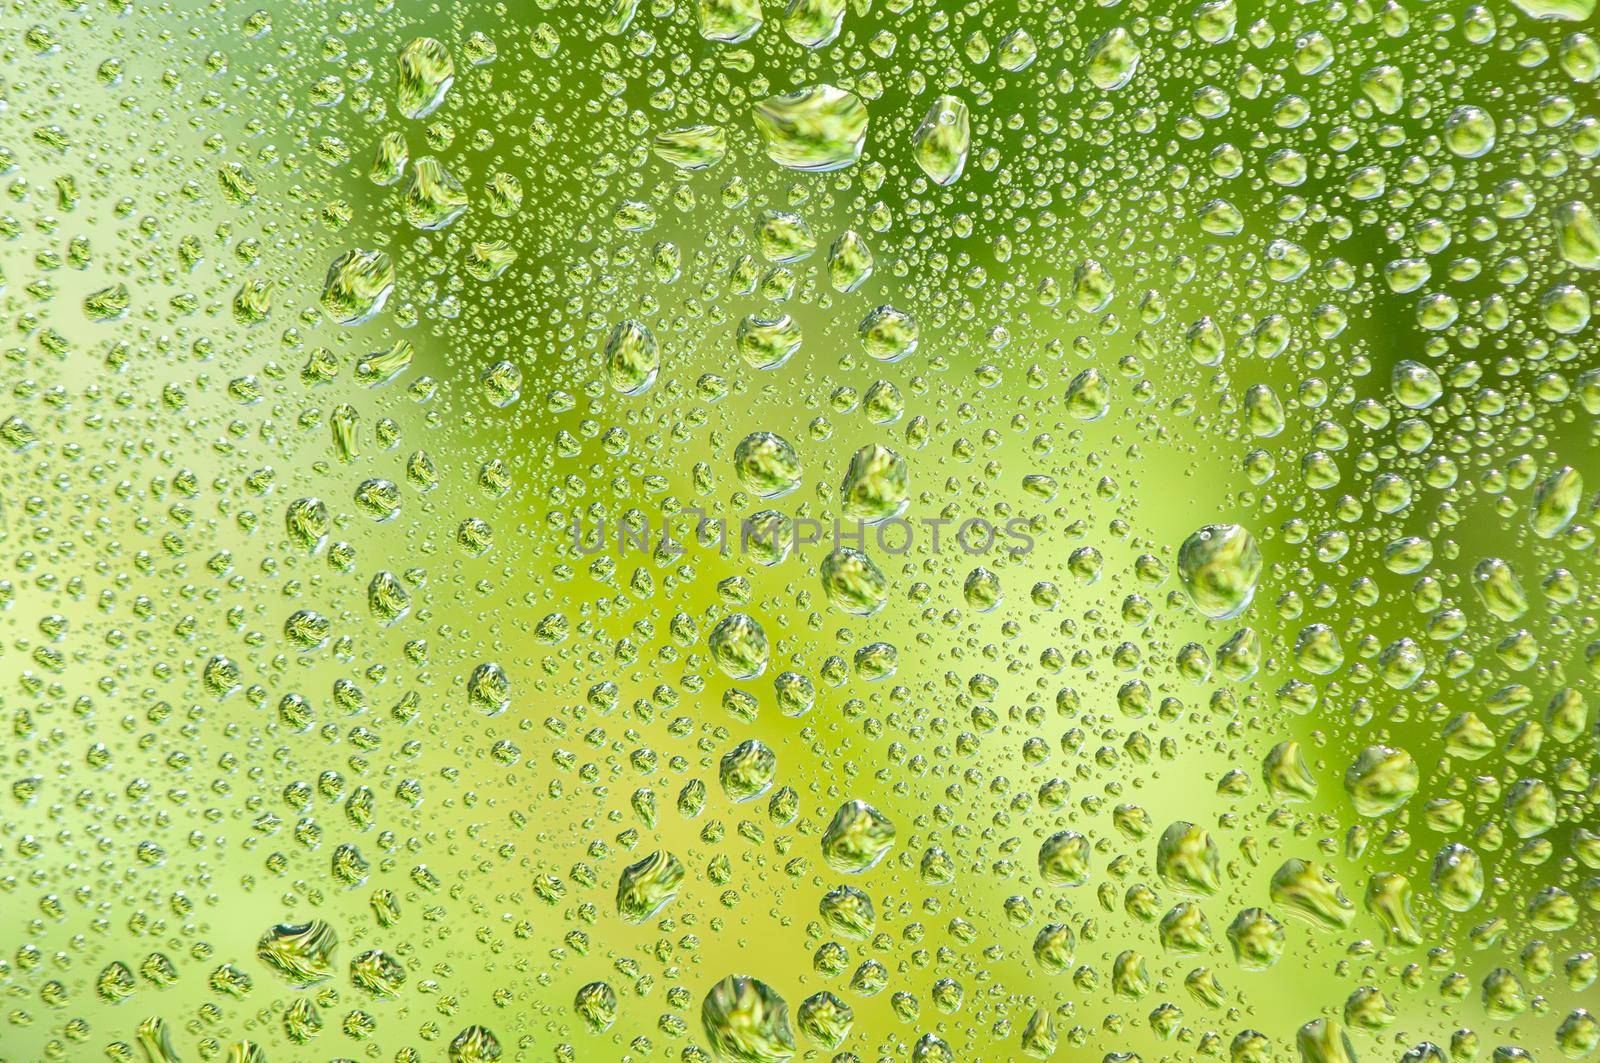 Water drop on glass window with green tree background.